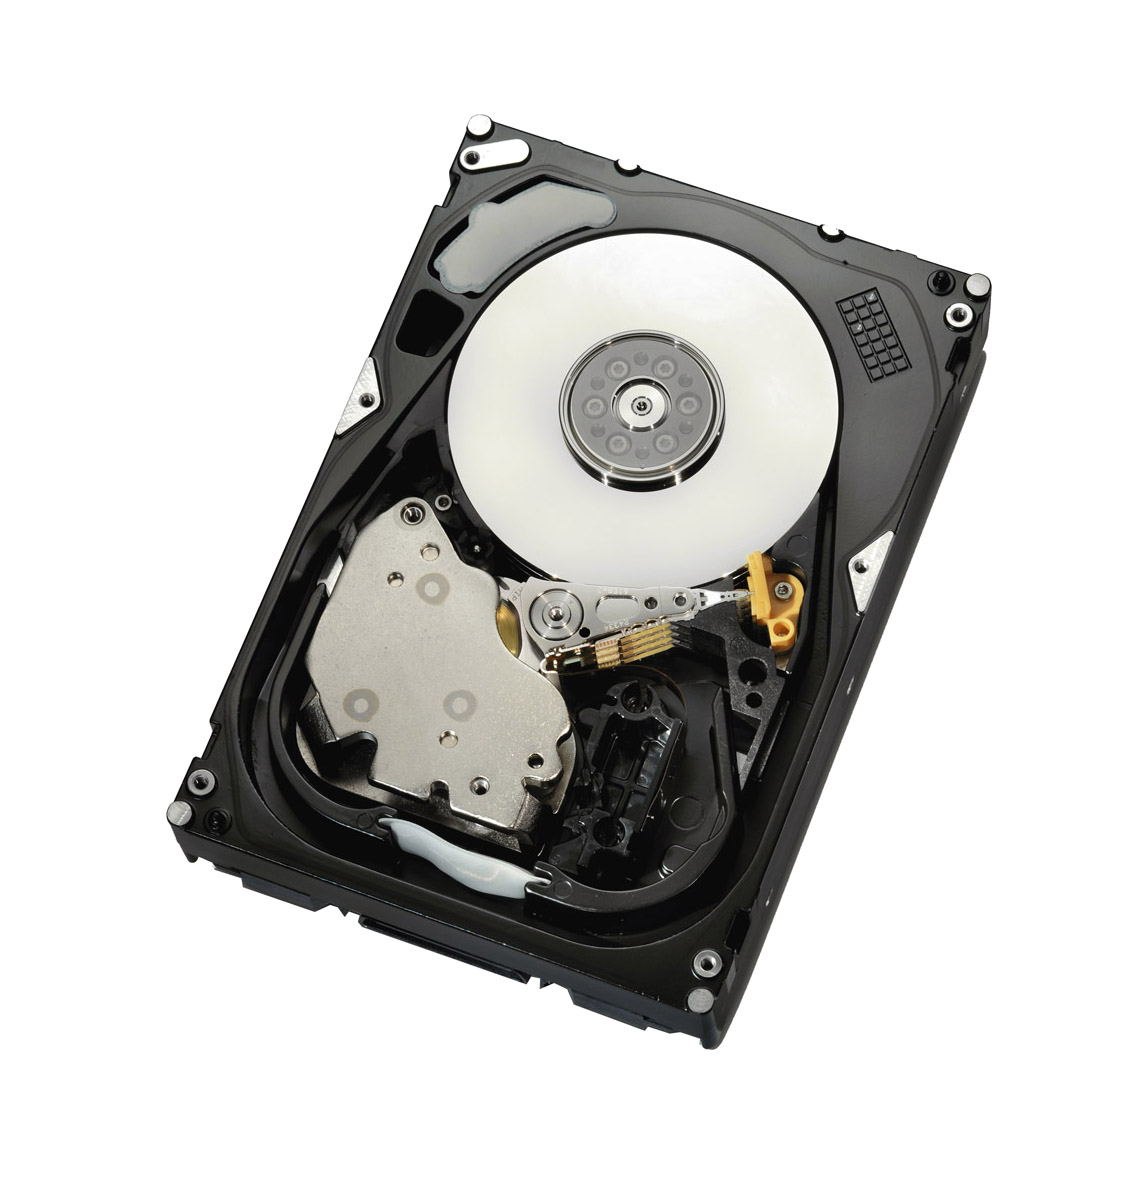 0870RW Dell 2TB 7200RPM SAS 6Gbps Nearline Hot Swap 3.5-inch Internal Hard Drive with Tray for PowerEdge Servers